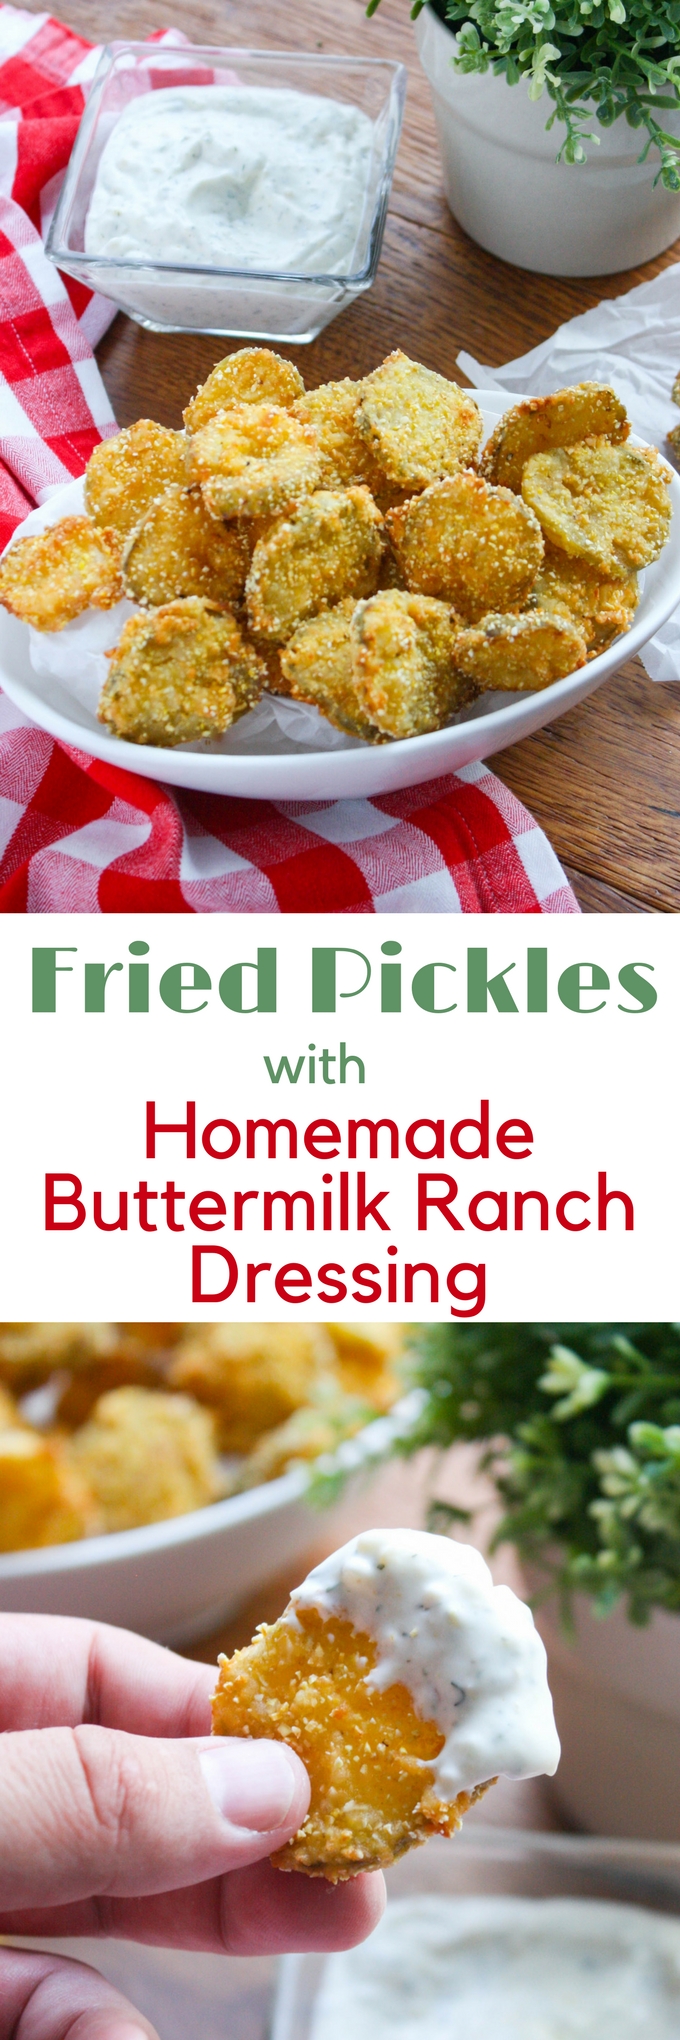 Fried Pickles with Homemade Buttermilk Ranch Dressing make a fun and delicious snack for any get together! You'll love these fried pickles dunked in a tasty dressing! 